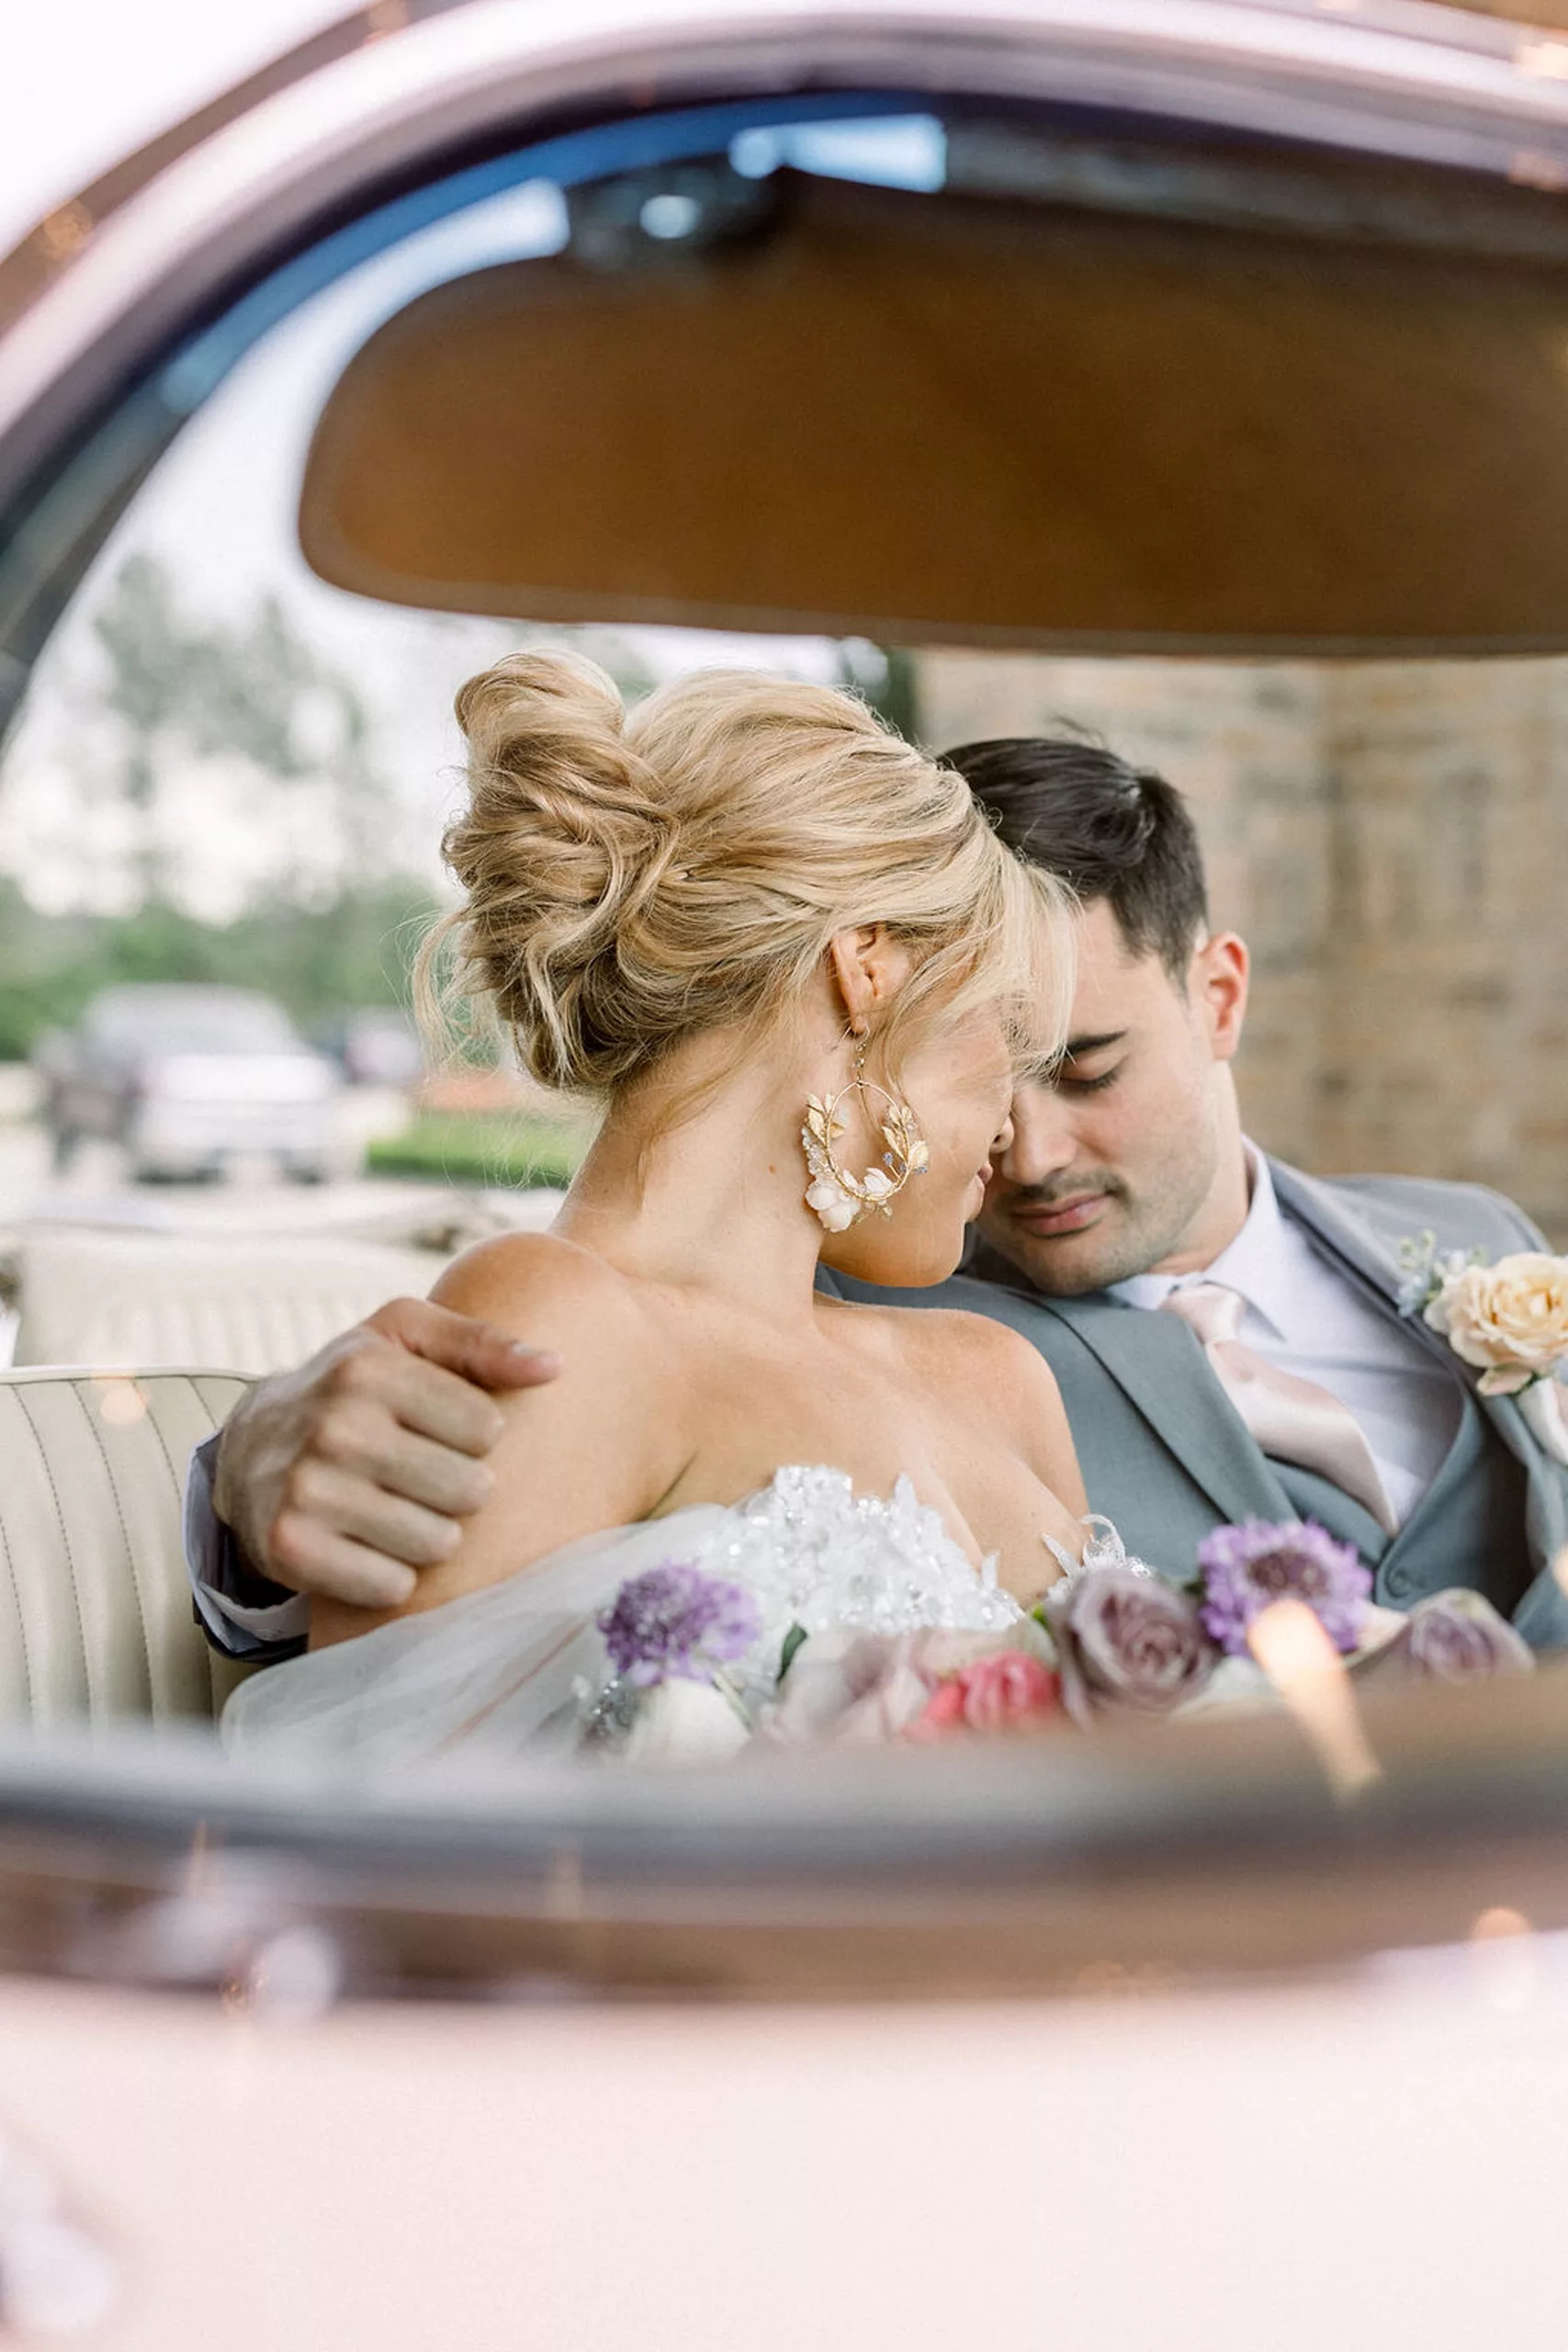 Newlyweds lean in close touching foreheads while sitting in a convertable